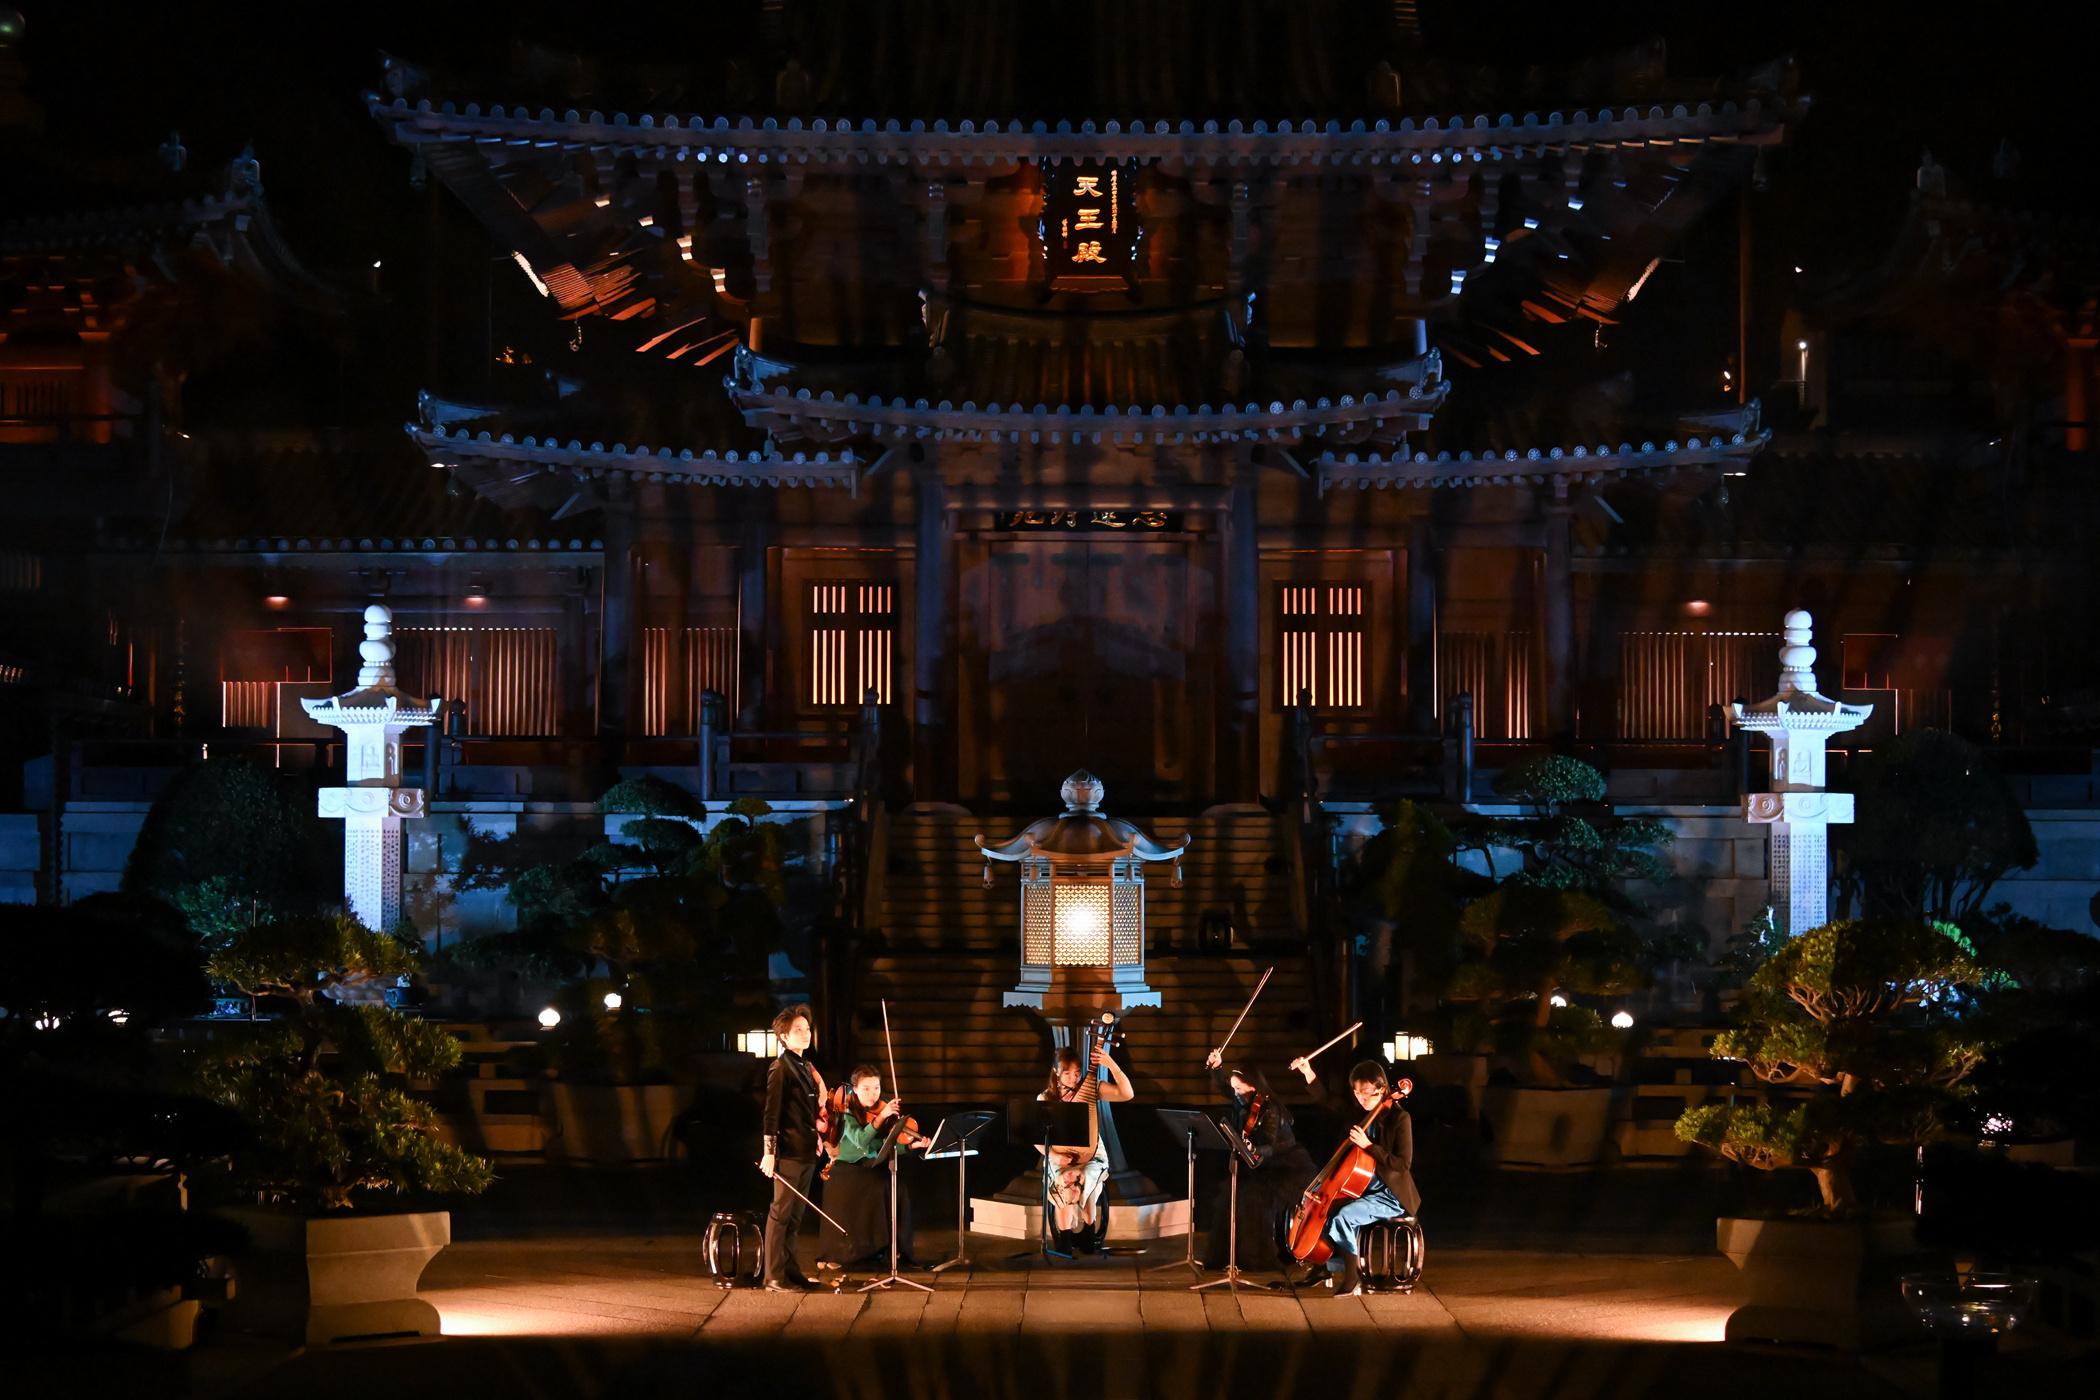 The Leisure and Cultural Services Department will hold two free online replay sessions of Tan Dun's "Purity . Transcendence" - Immersive Operas in the Courtyard of Chi Lin Nunnery on June 10 and 11. Photo shows a scene from the performance of "Purity . Transcendence" - Immersive Operas in the Courtyard of Chi Lin Nunnery.